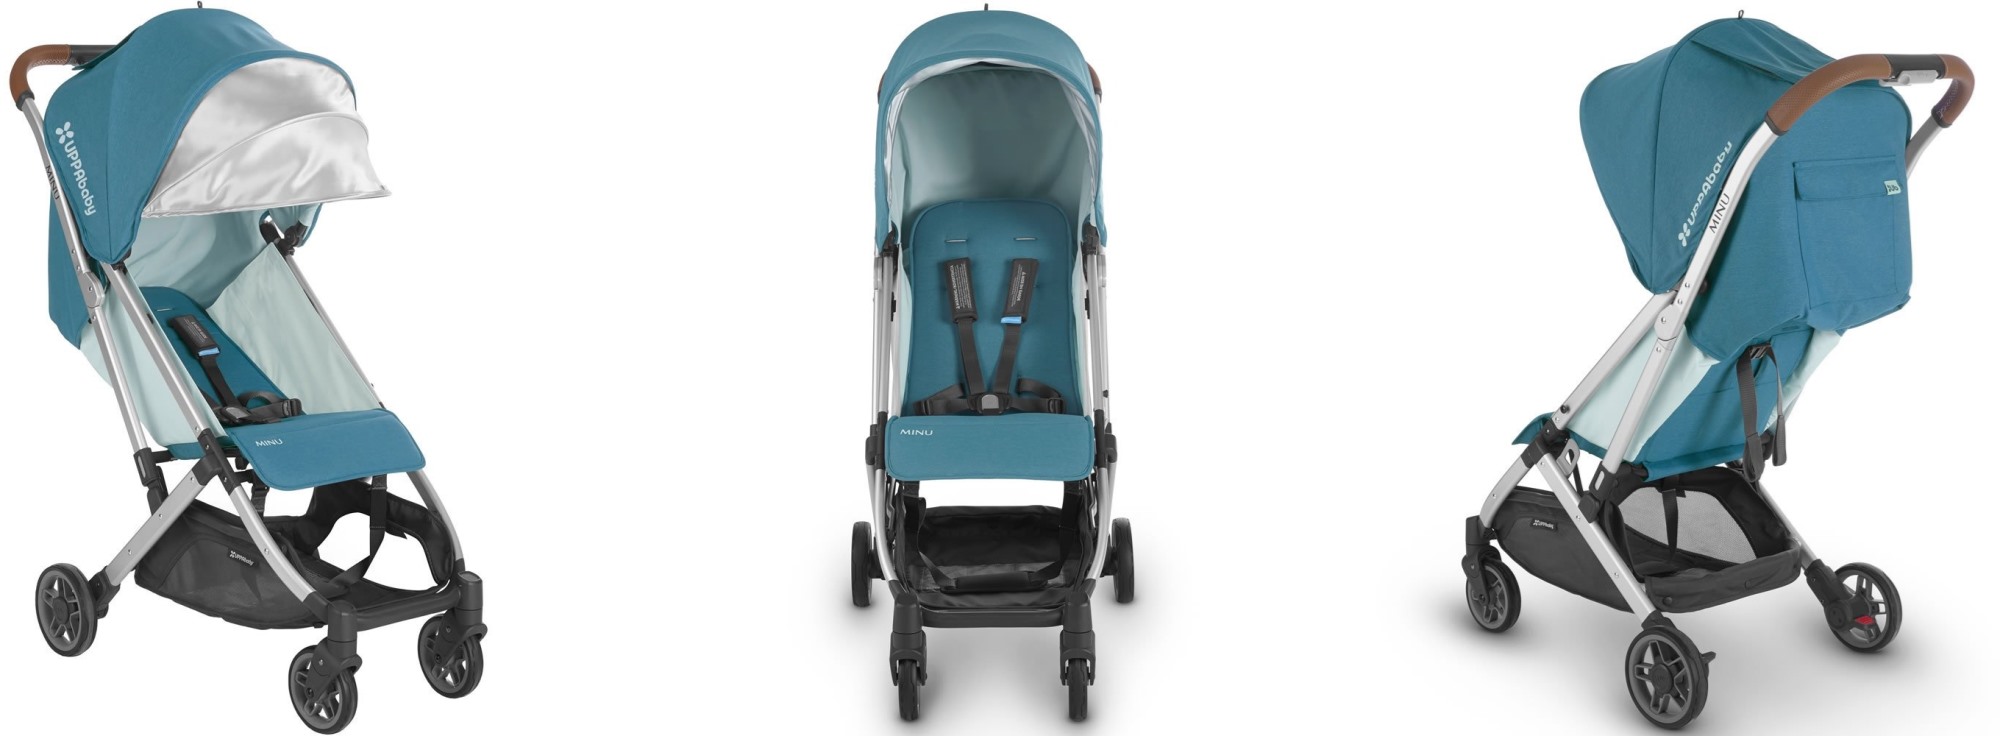 UPPAbaby MINU Stroller Review